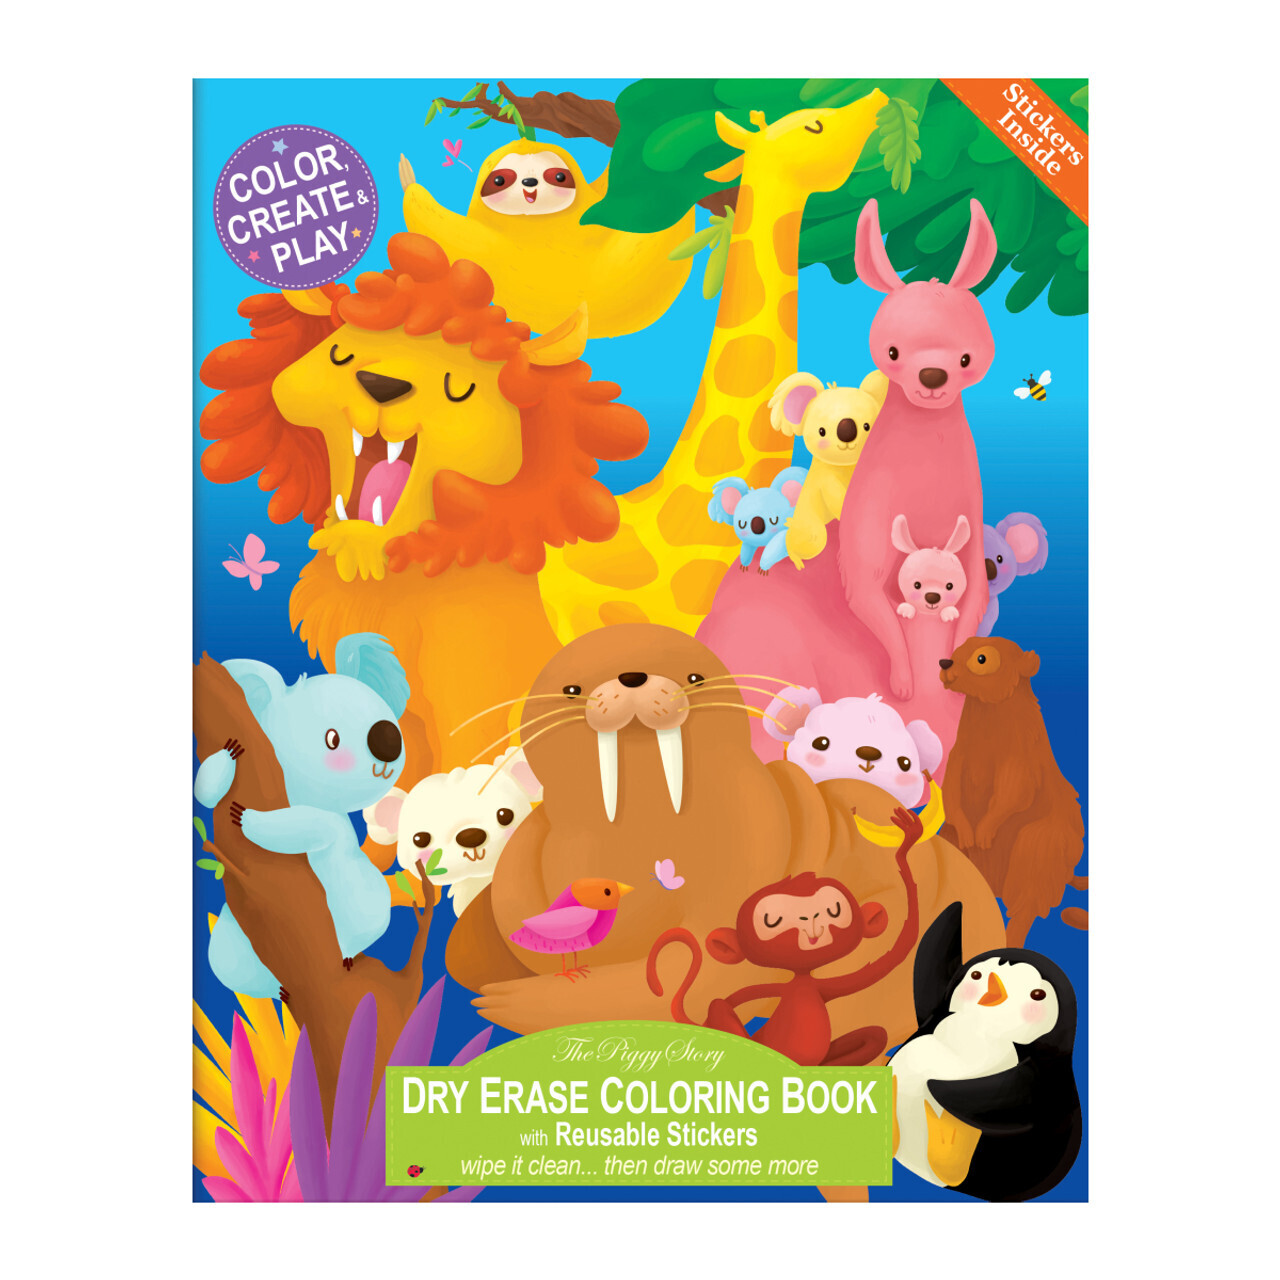 The Piggy Story Dry Erase Coloring Book with Reusable Stickers- Animals Around the World